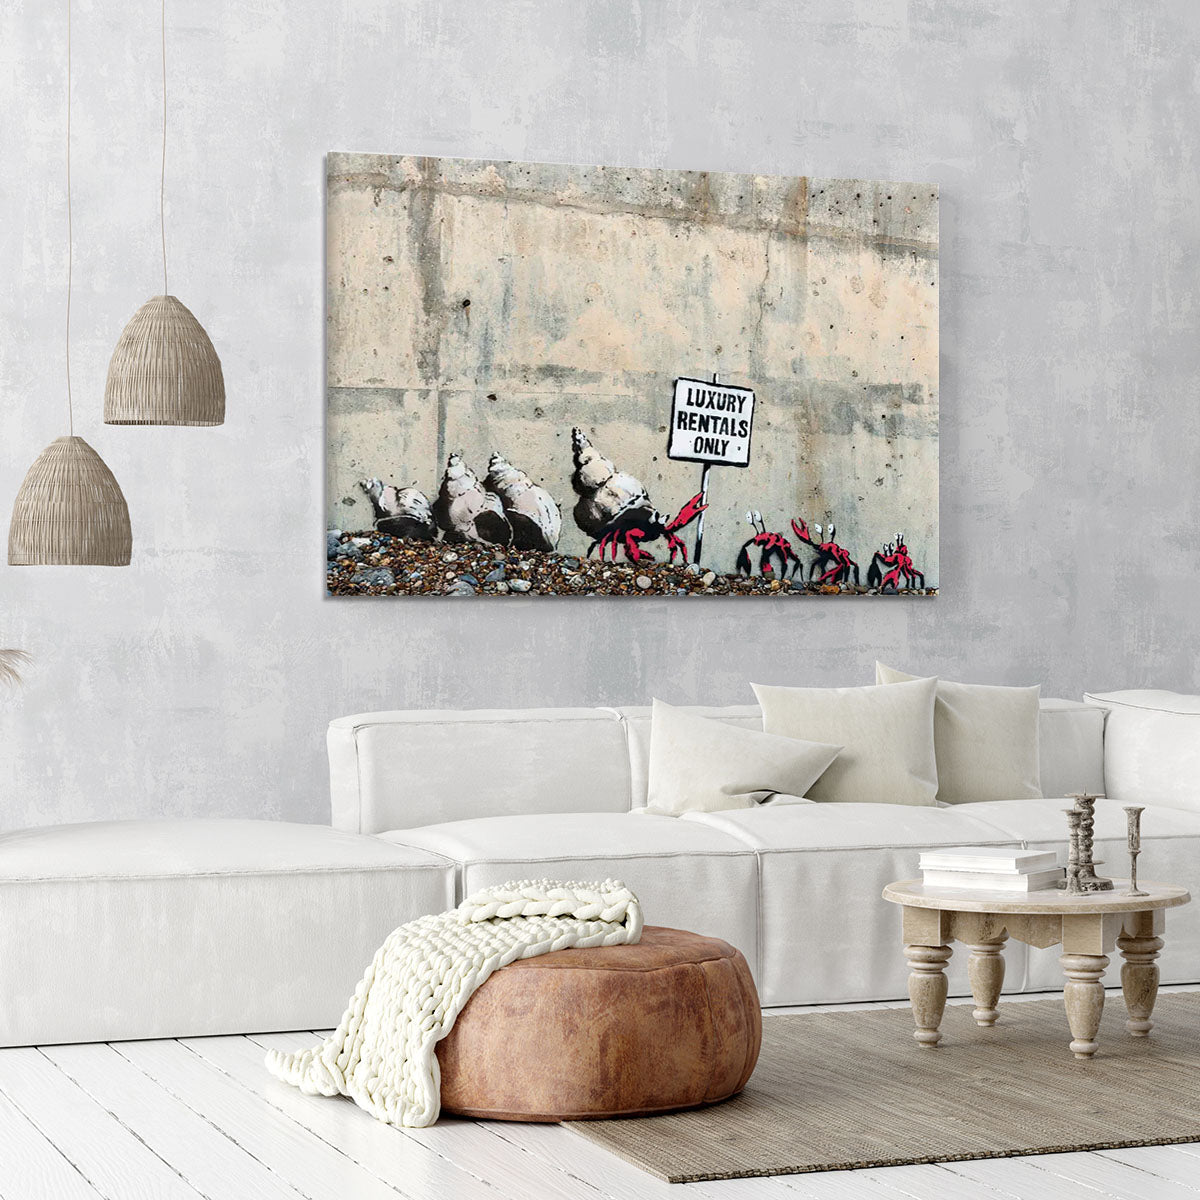 Banksy Luxury Rentals Only Canvas Print or Poster - Canvas Art Rocks - 6